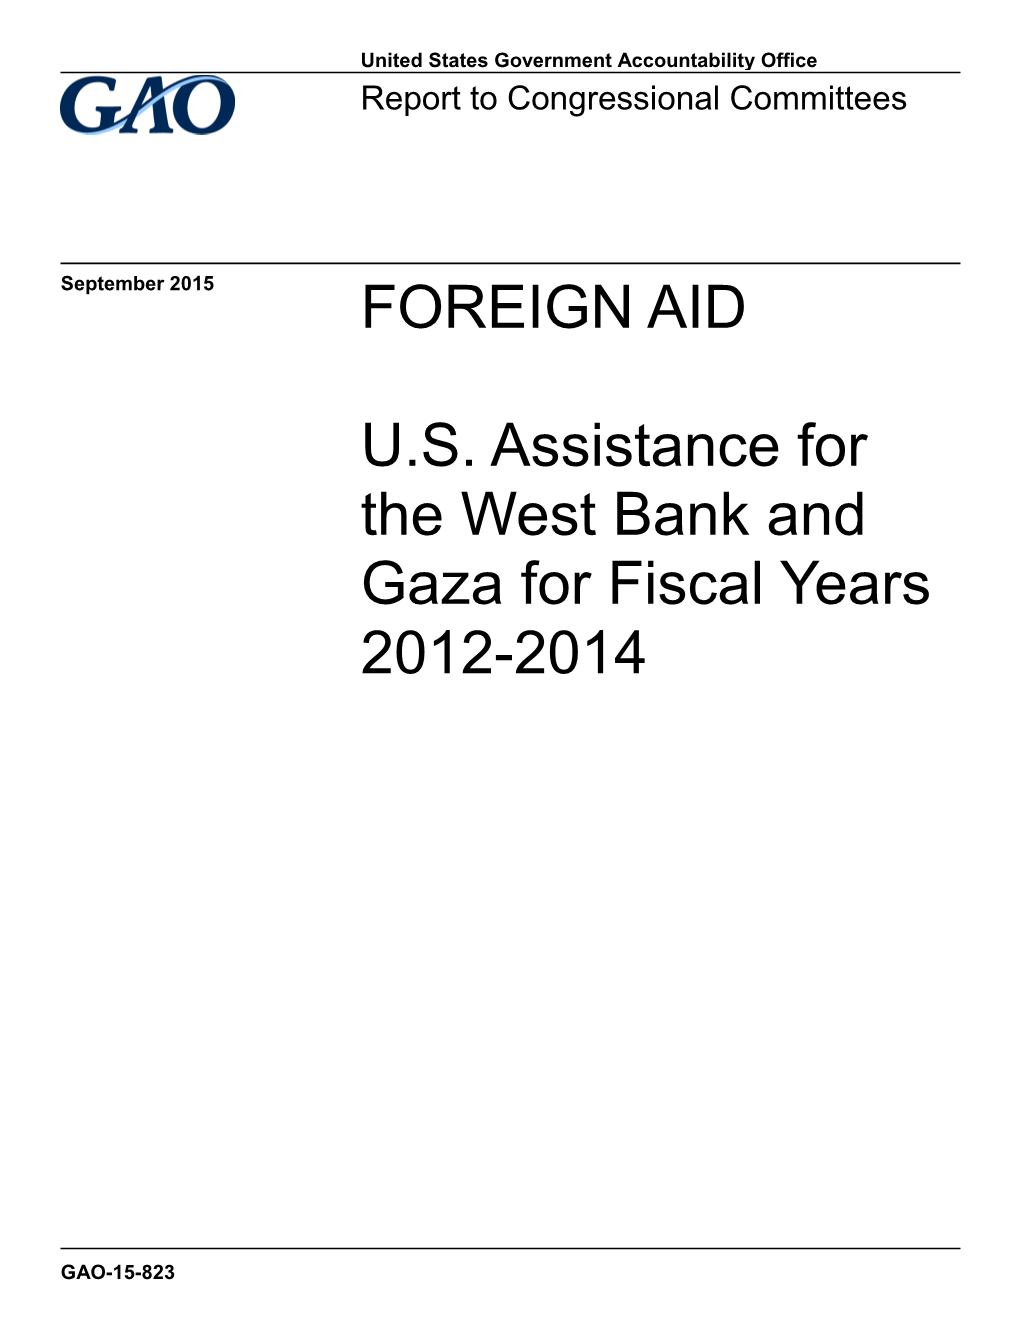 US Assistance for the West Bank and Gaza for Fiscal Years 2012-2014